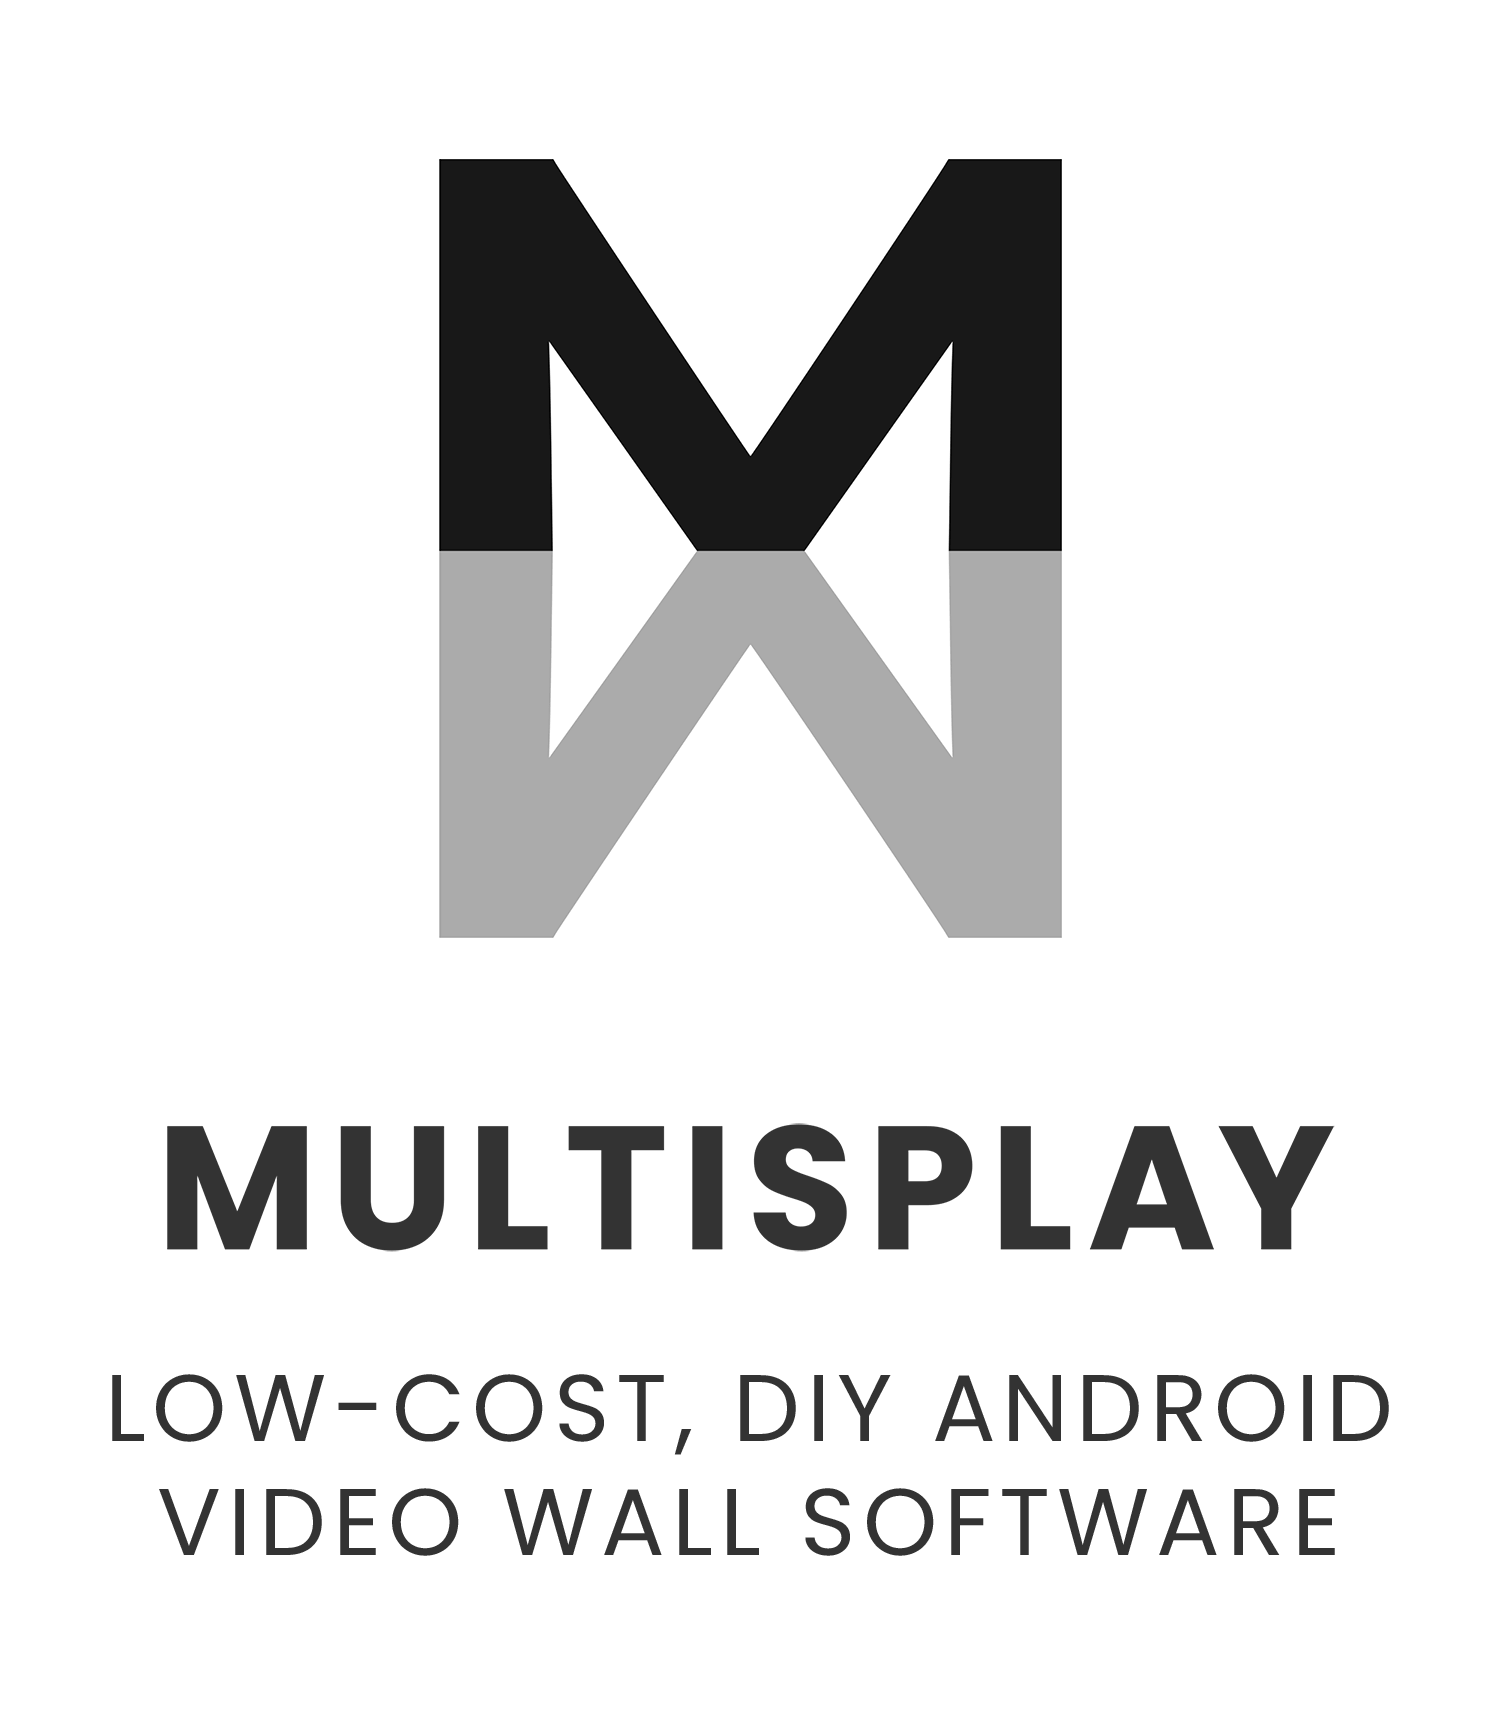 Multisplay - Low-cost, DIY Android Video Wall Software